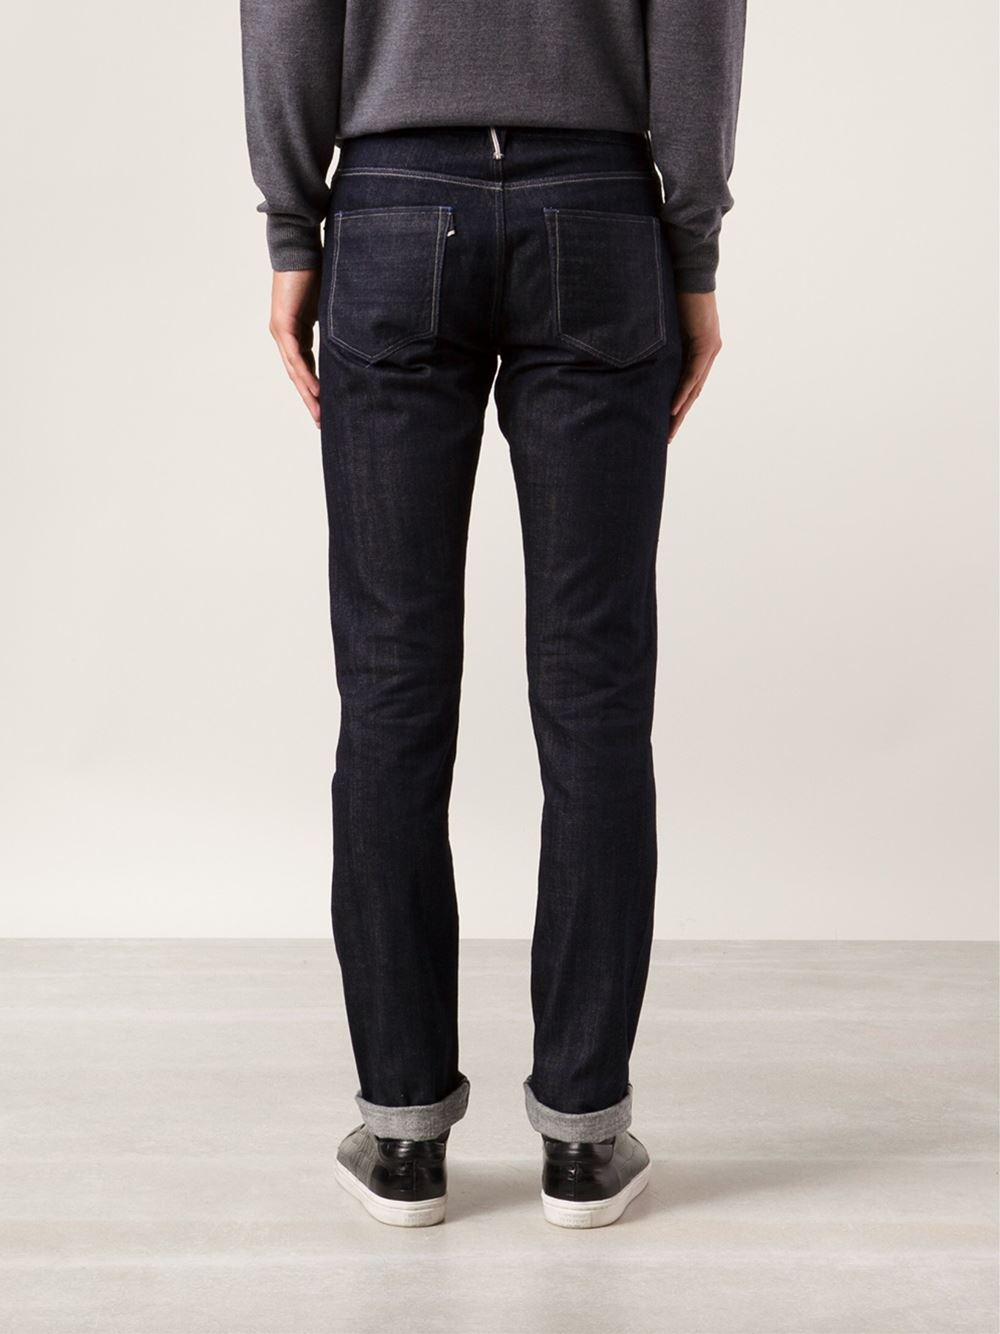 Lyst - 3X1 M3 Straight Jeans in Blue for Men